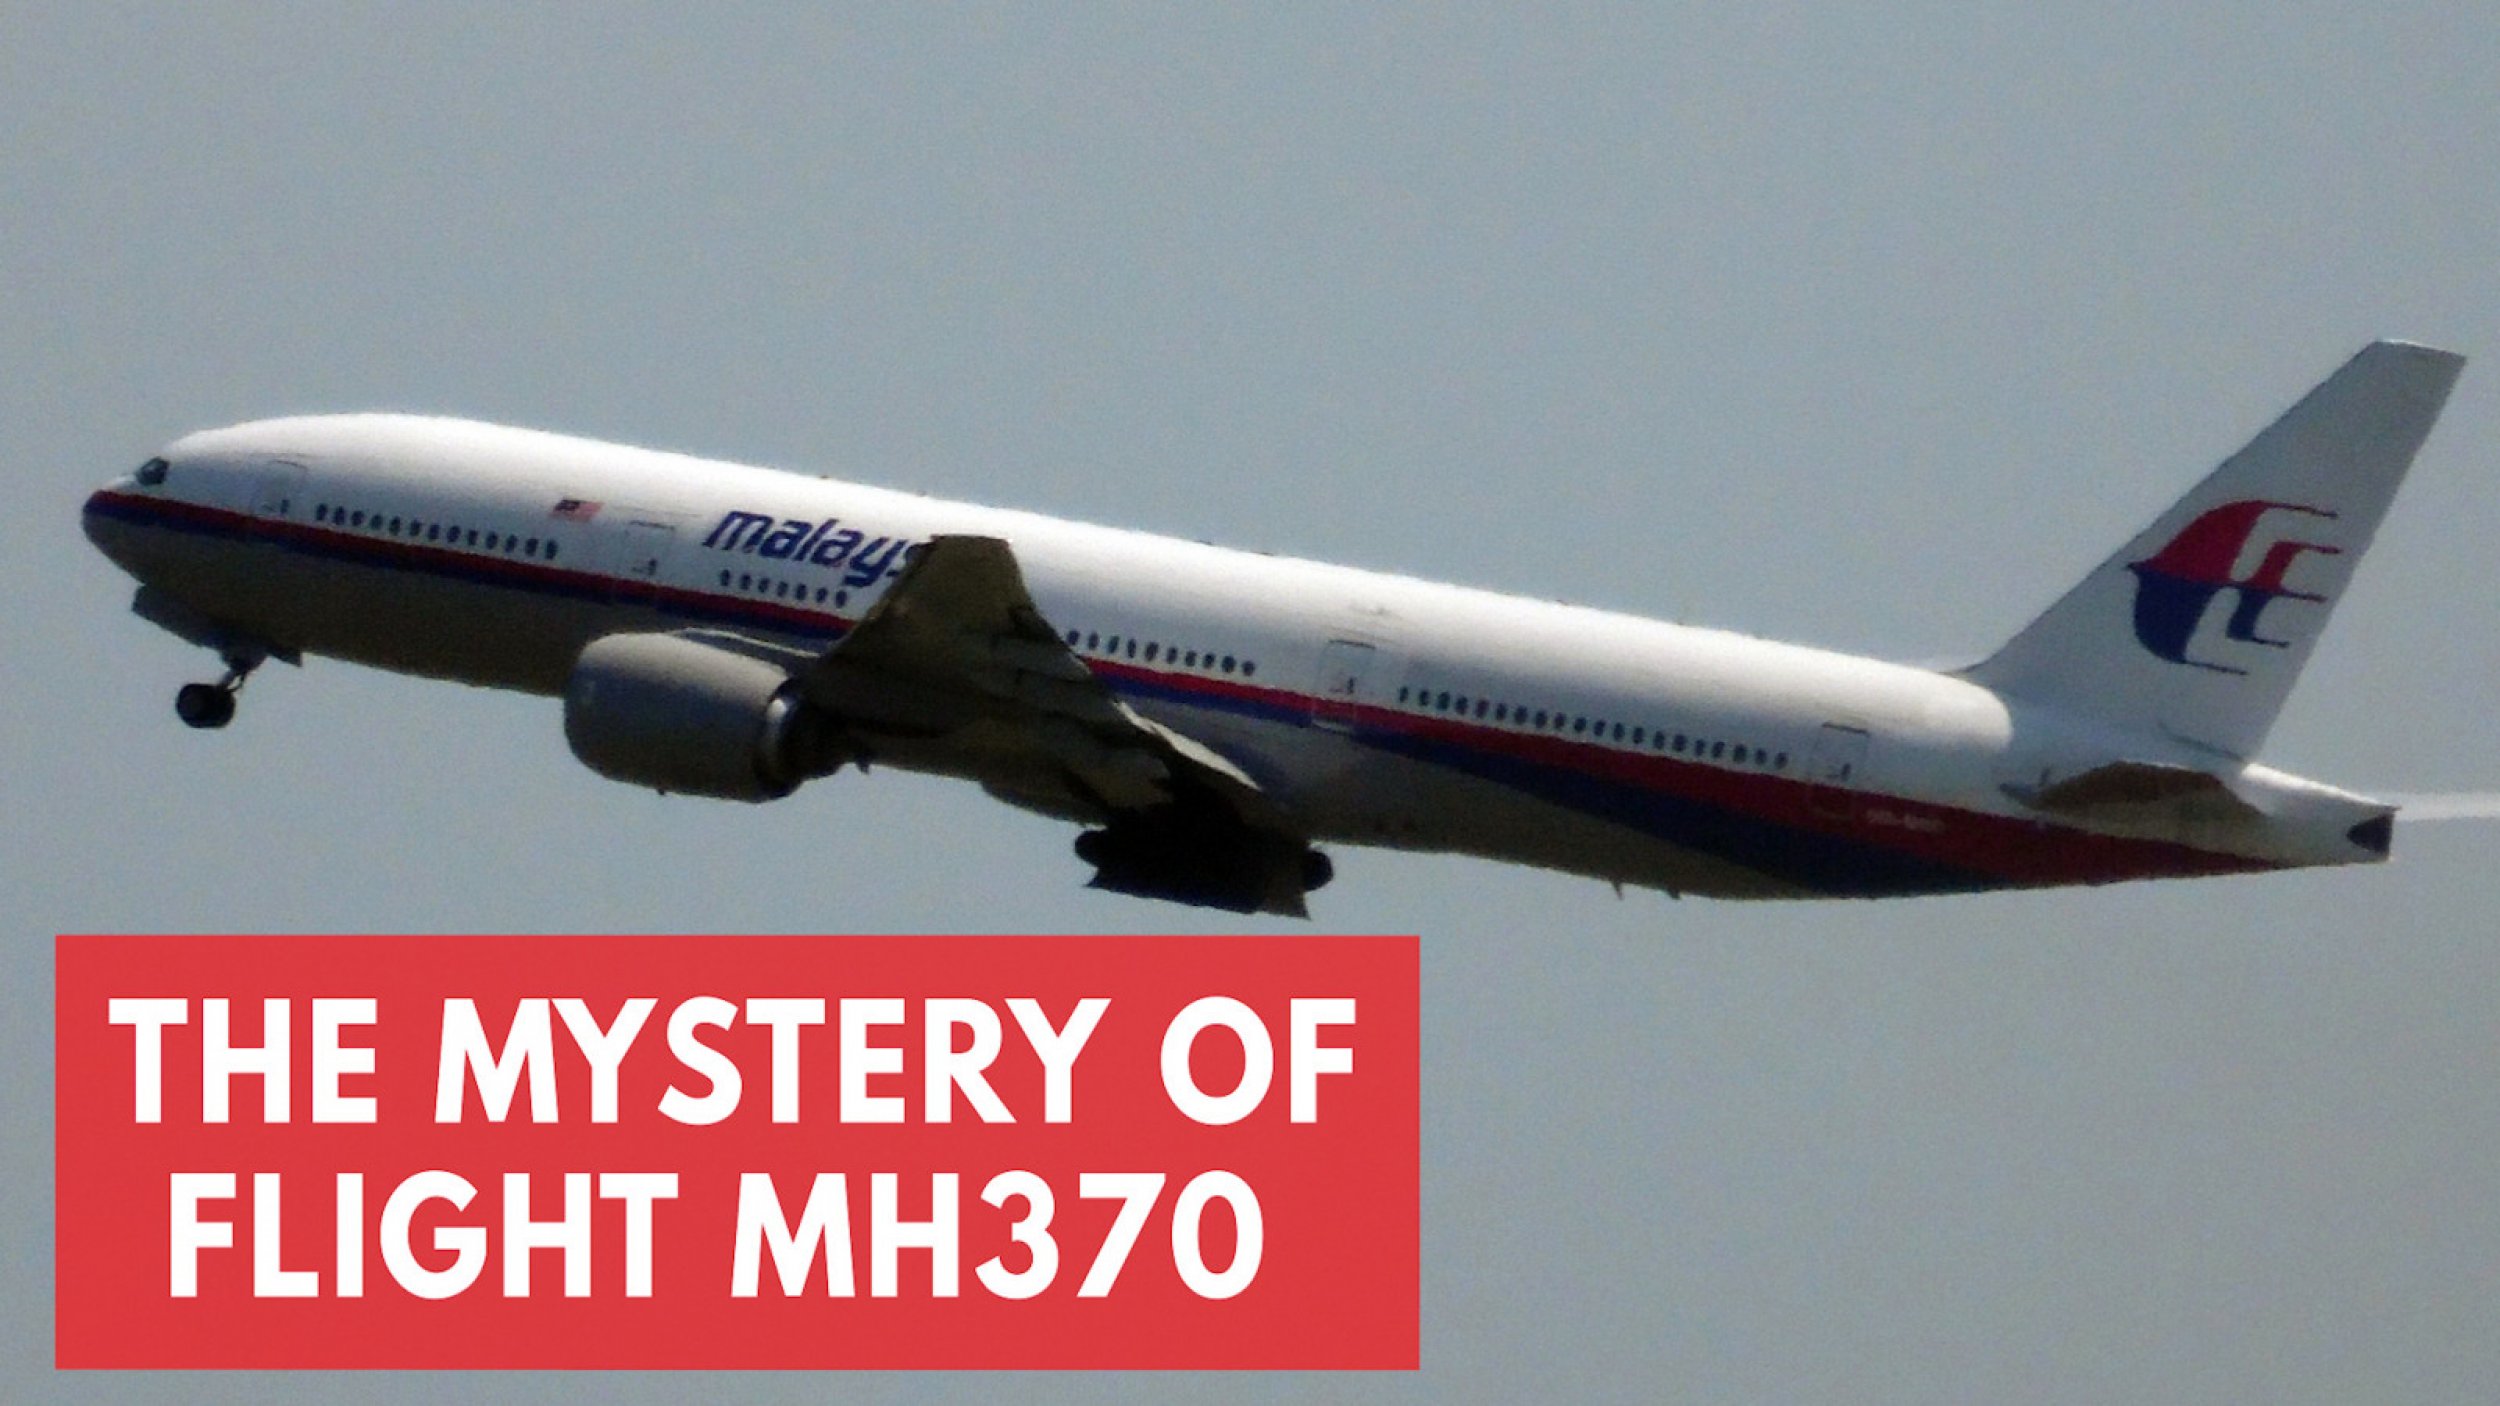 MH370 Malaysia Airlines Flight Investigators Say Captain Crashed Plane In Murder-Suicide